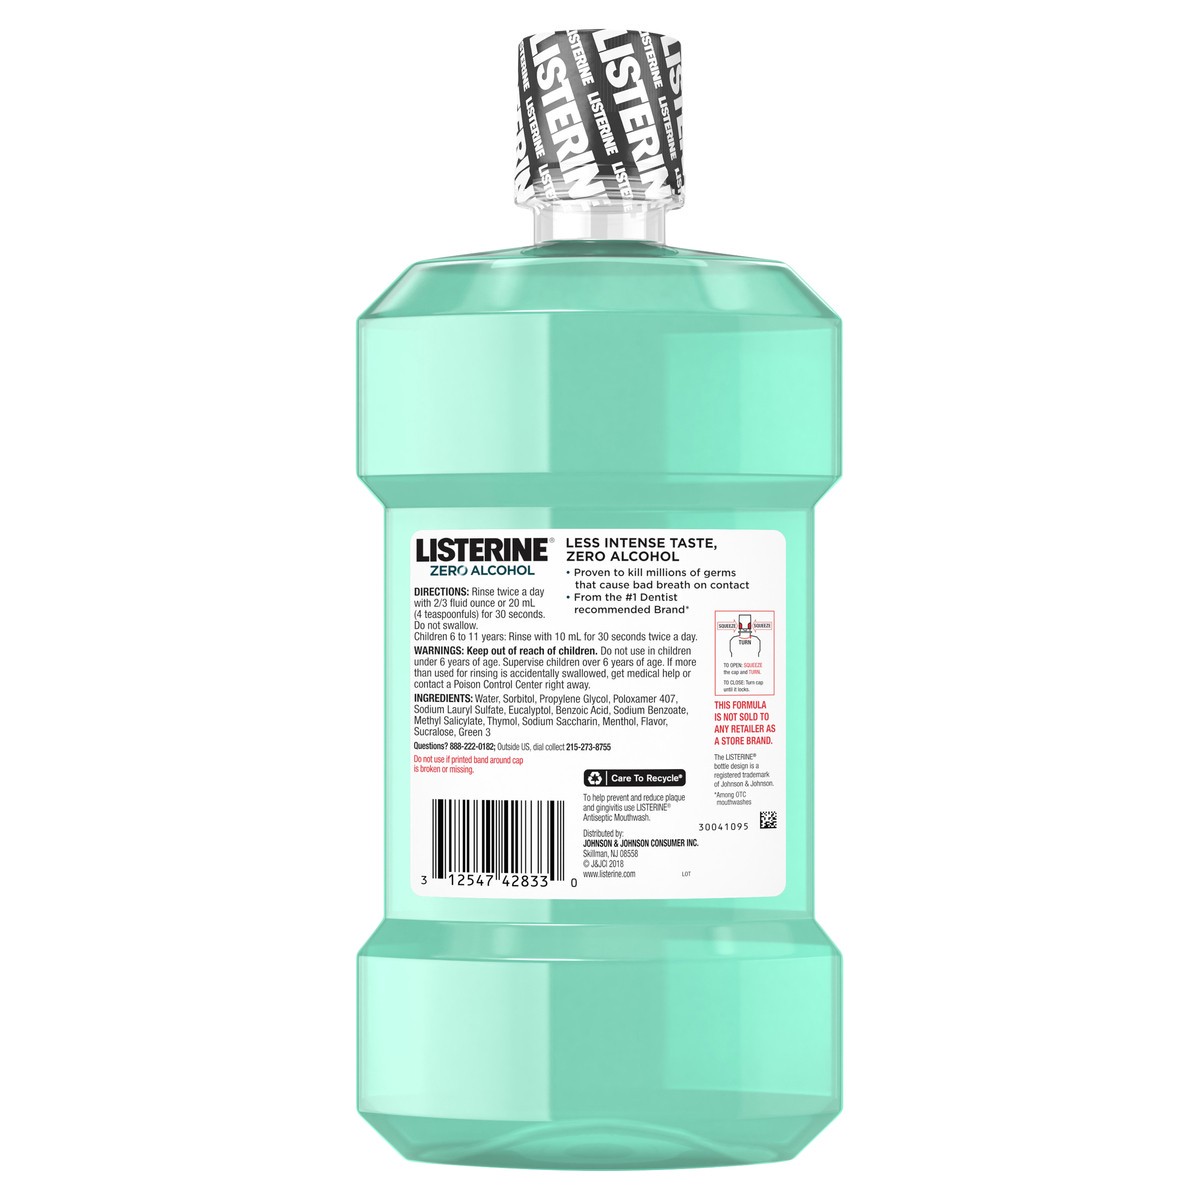 slide 6 of 6, Listerine Mouthwash, Zero Alcohol, Germ Killing, Less Intense Formula, Bad Breath Treatment, Alcohol Free Mouth Wash for Adults; Cool Mint Flavor, 1 L (Pack of 1), 33.8 oz